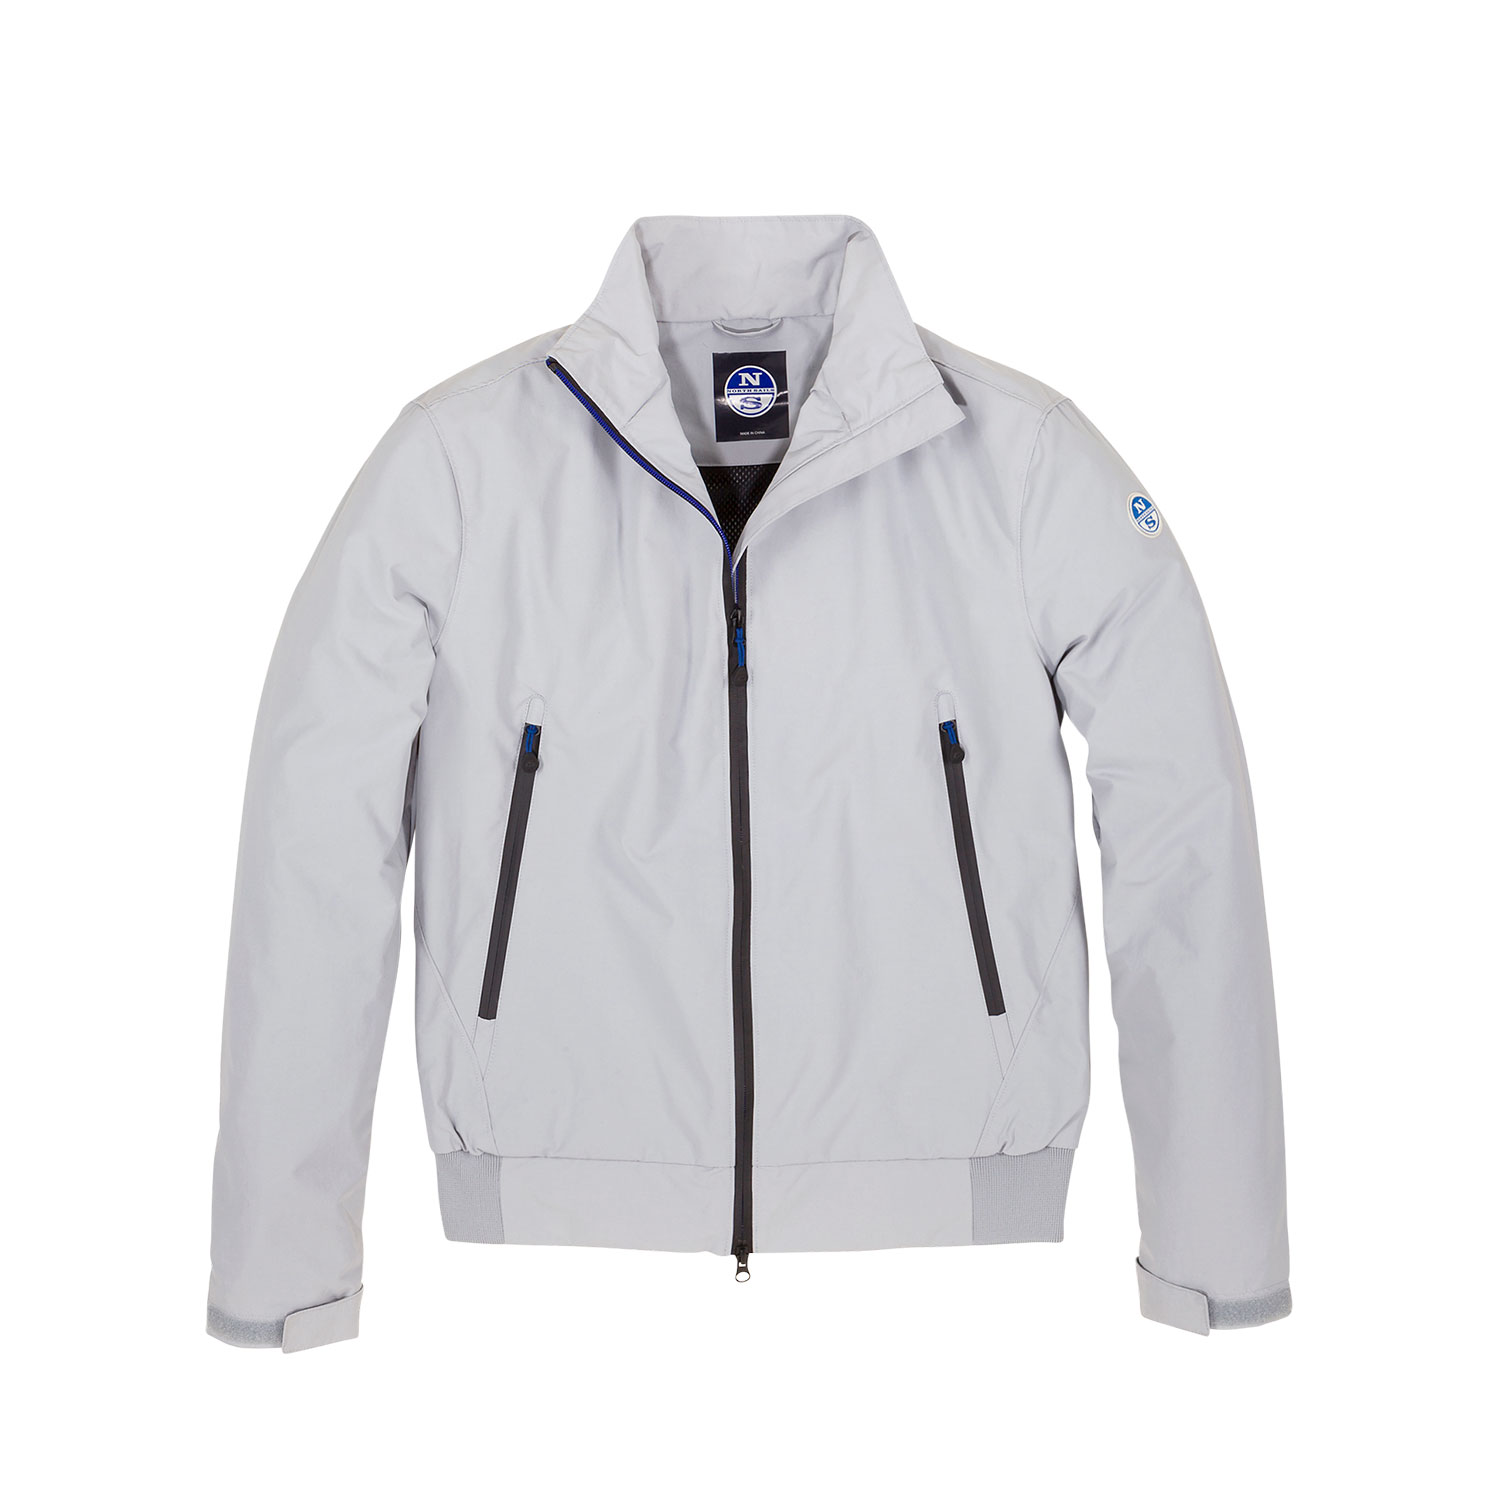 https://www.coastwatersports.ru/images/products/2020-Noarth-Sails-Inshore-Sailing-Jacket-27M003_0022_psfront1.jpg